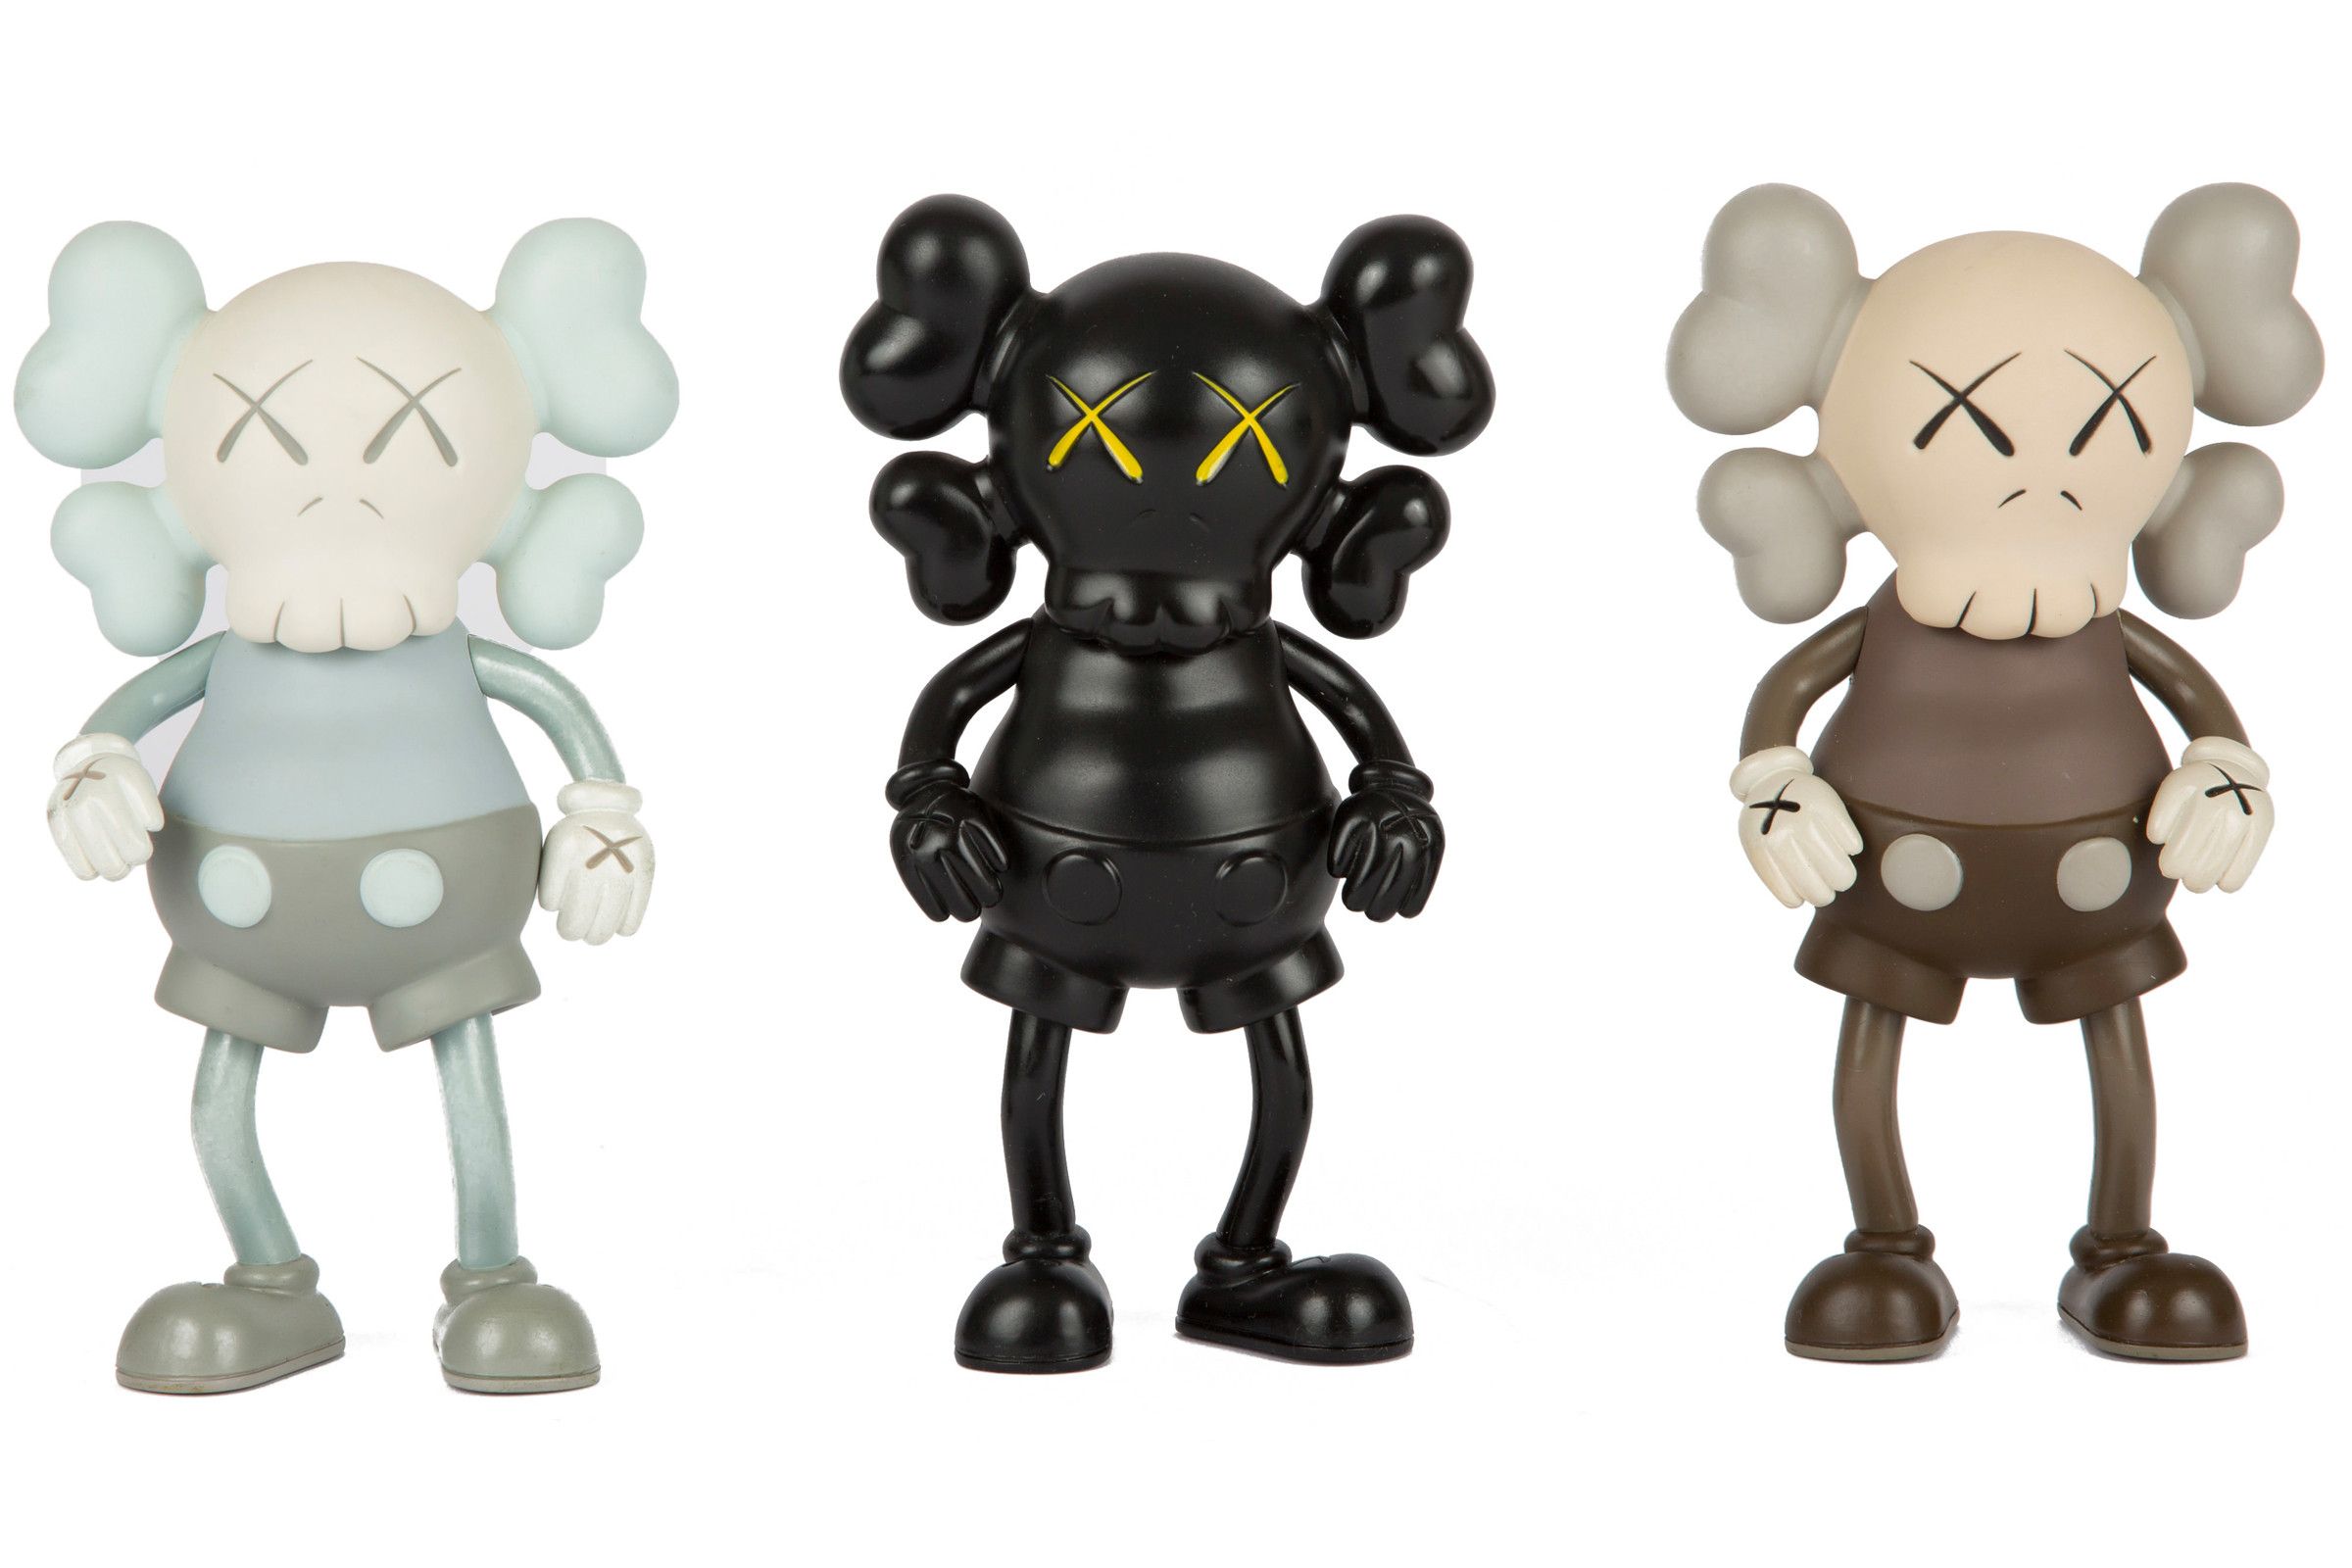 The Intersection of Art and Streetwear: The Legacy of KAWS